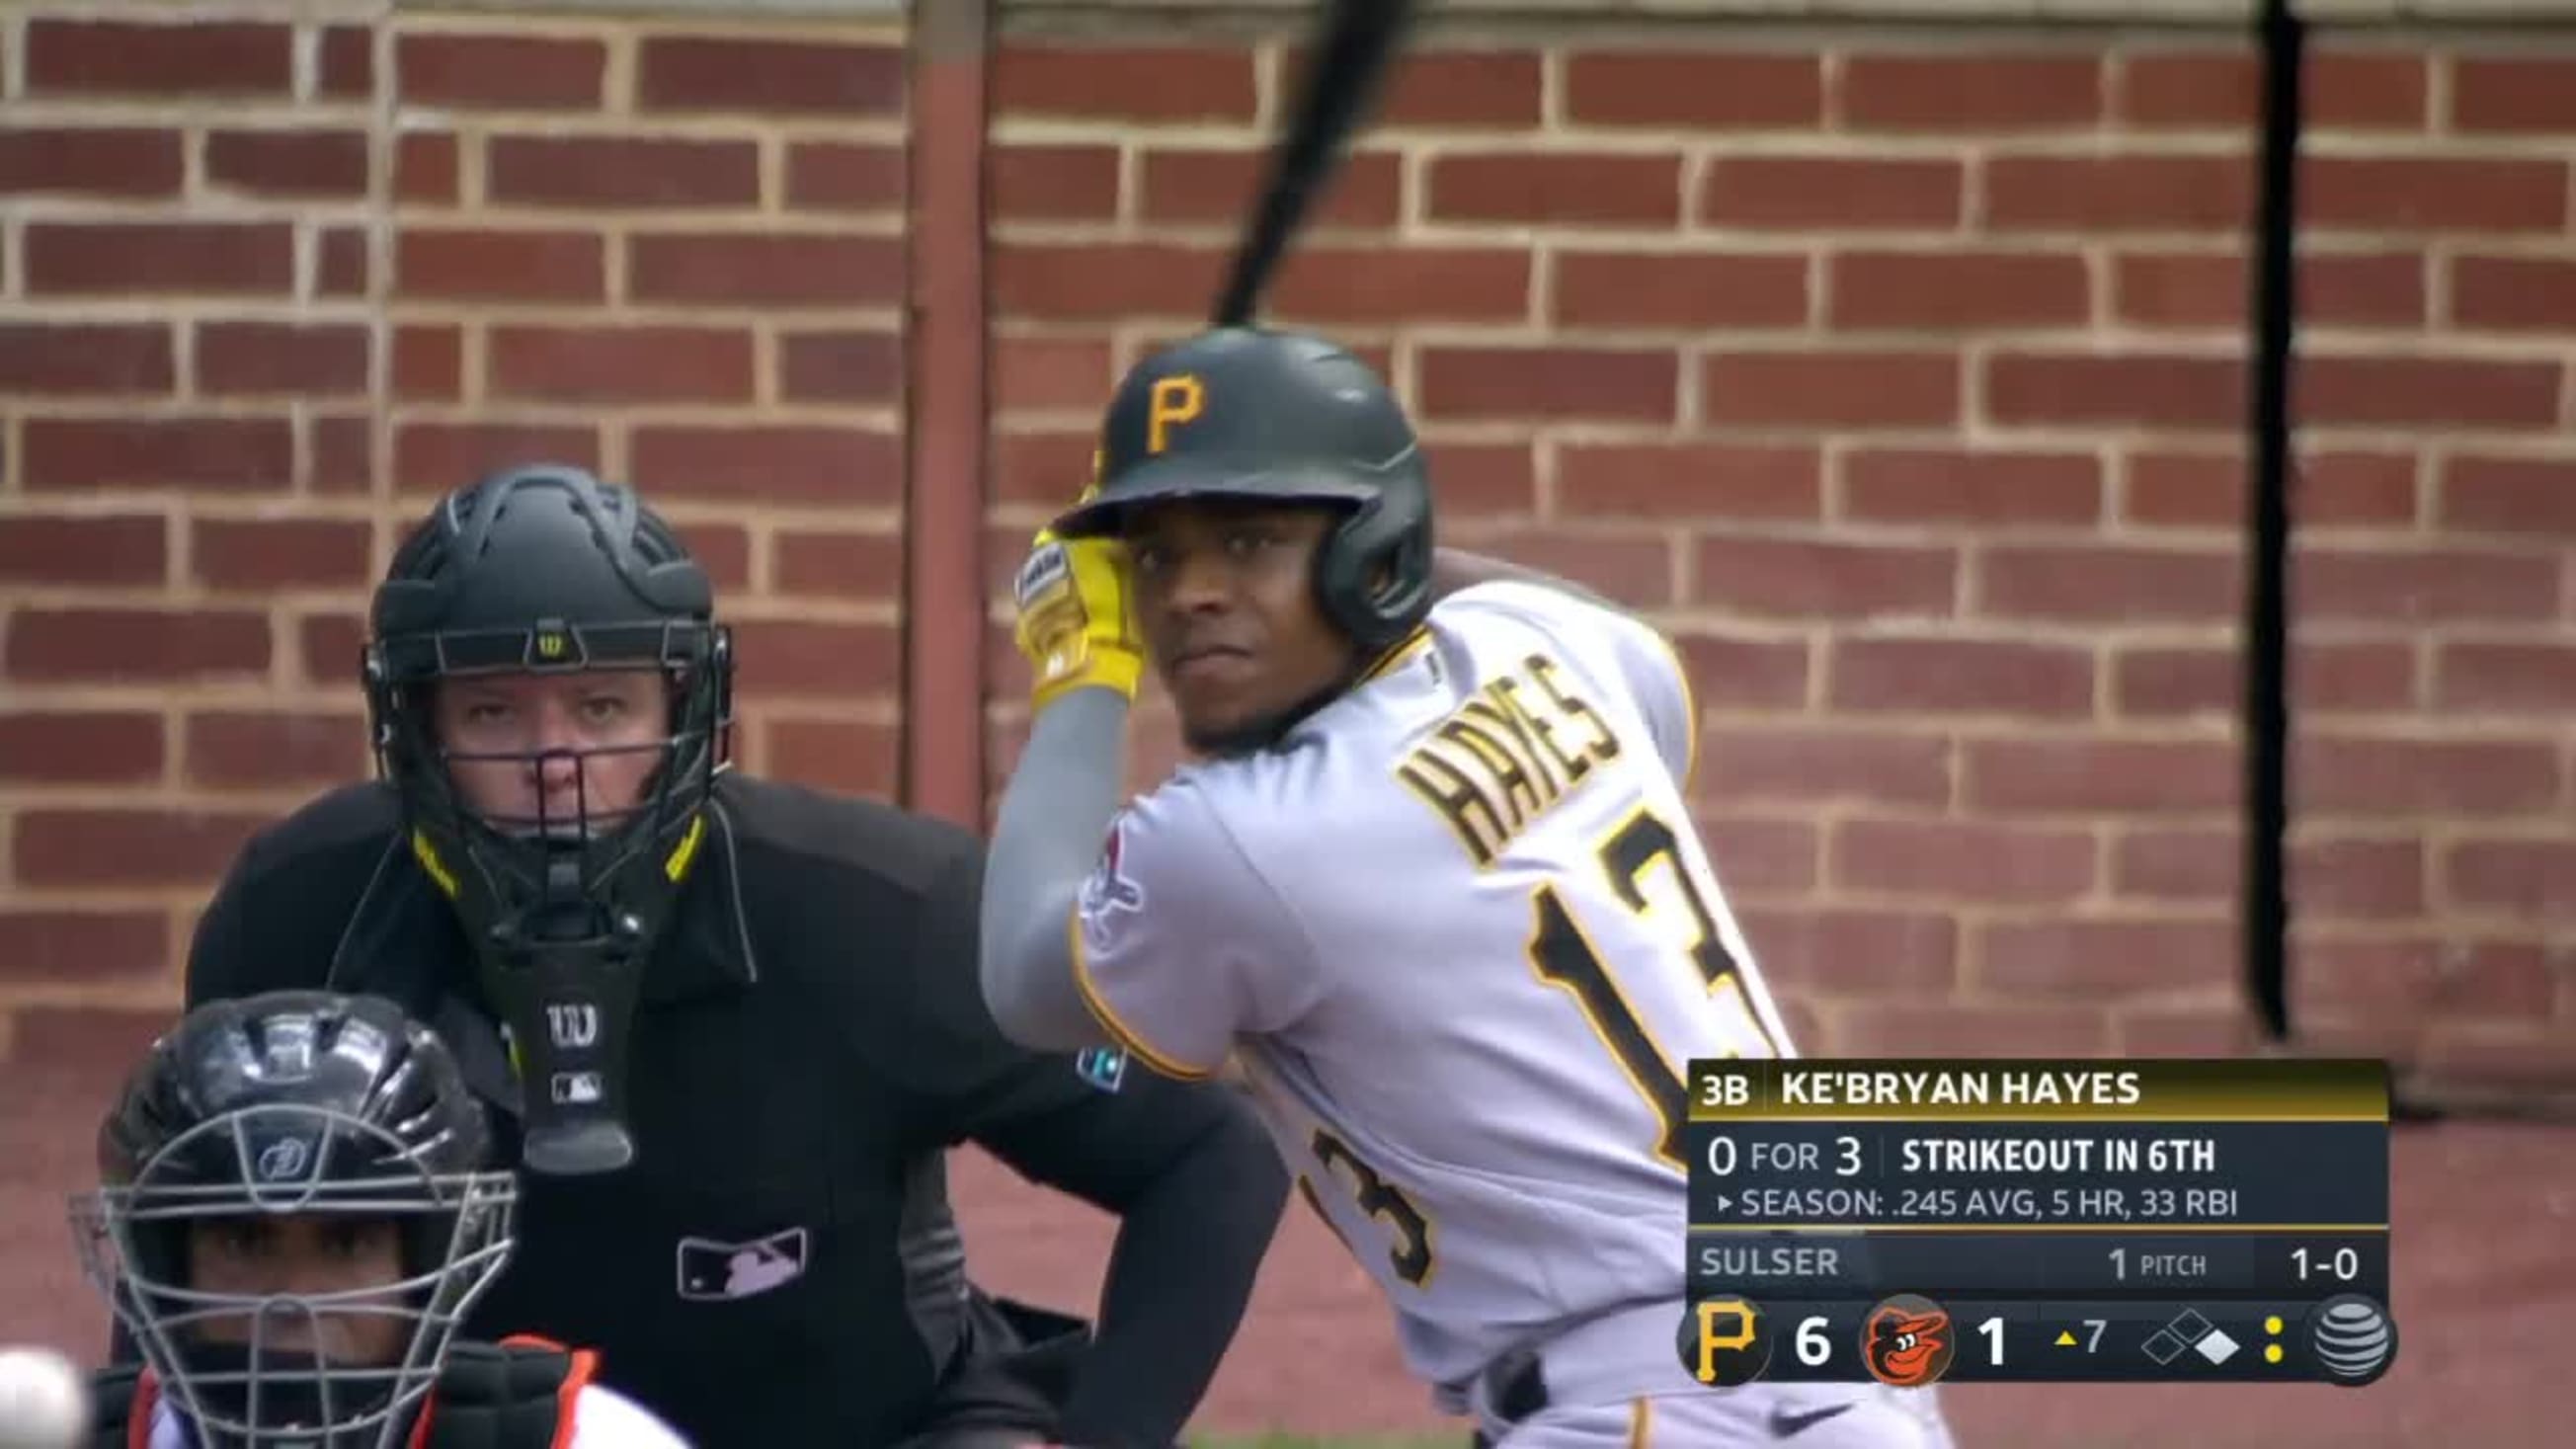 Ke'Bryan Hayes' 2-run homer in the 8th inning sends the Pirates to 6-3 win  over the Royals - MLB 